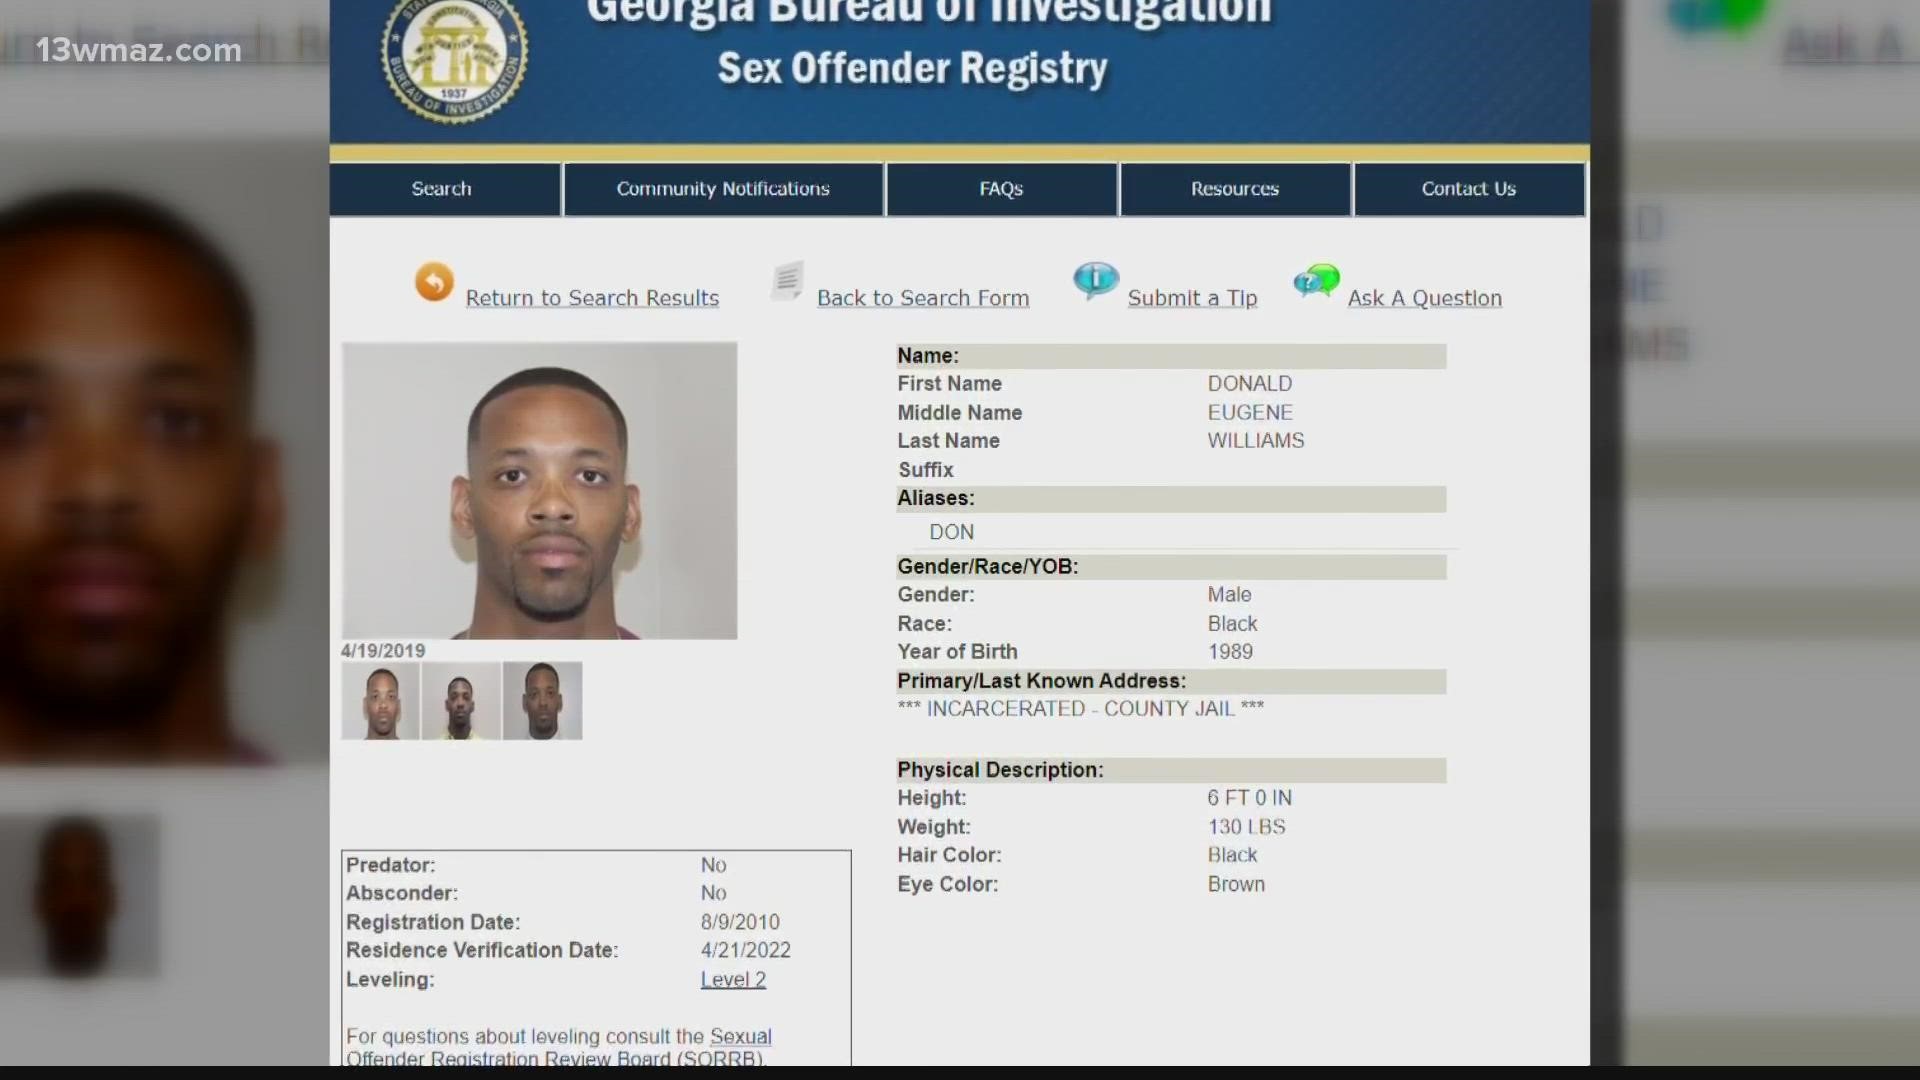 The Georgia Bureau of Investigation's Sex Offender Registry says Williams was added to it in August 2010.